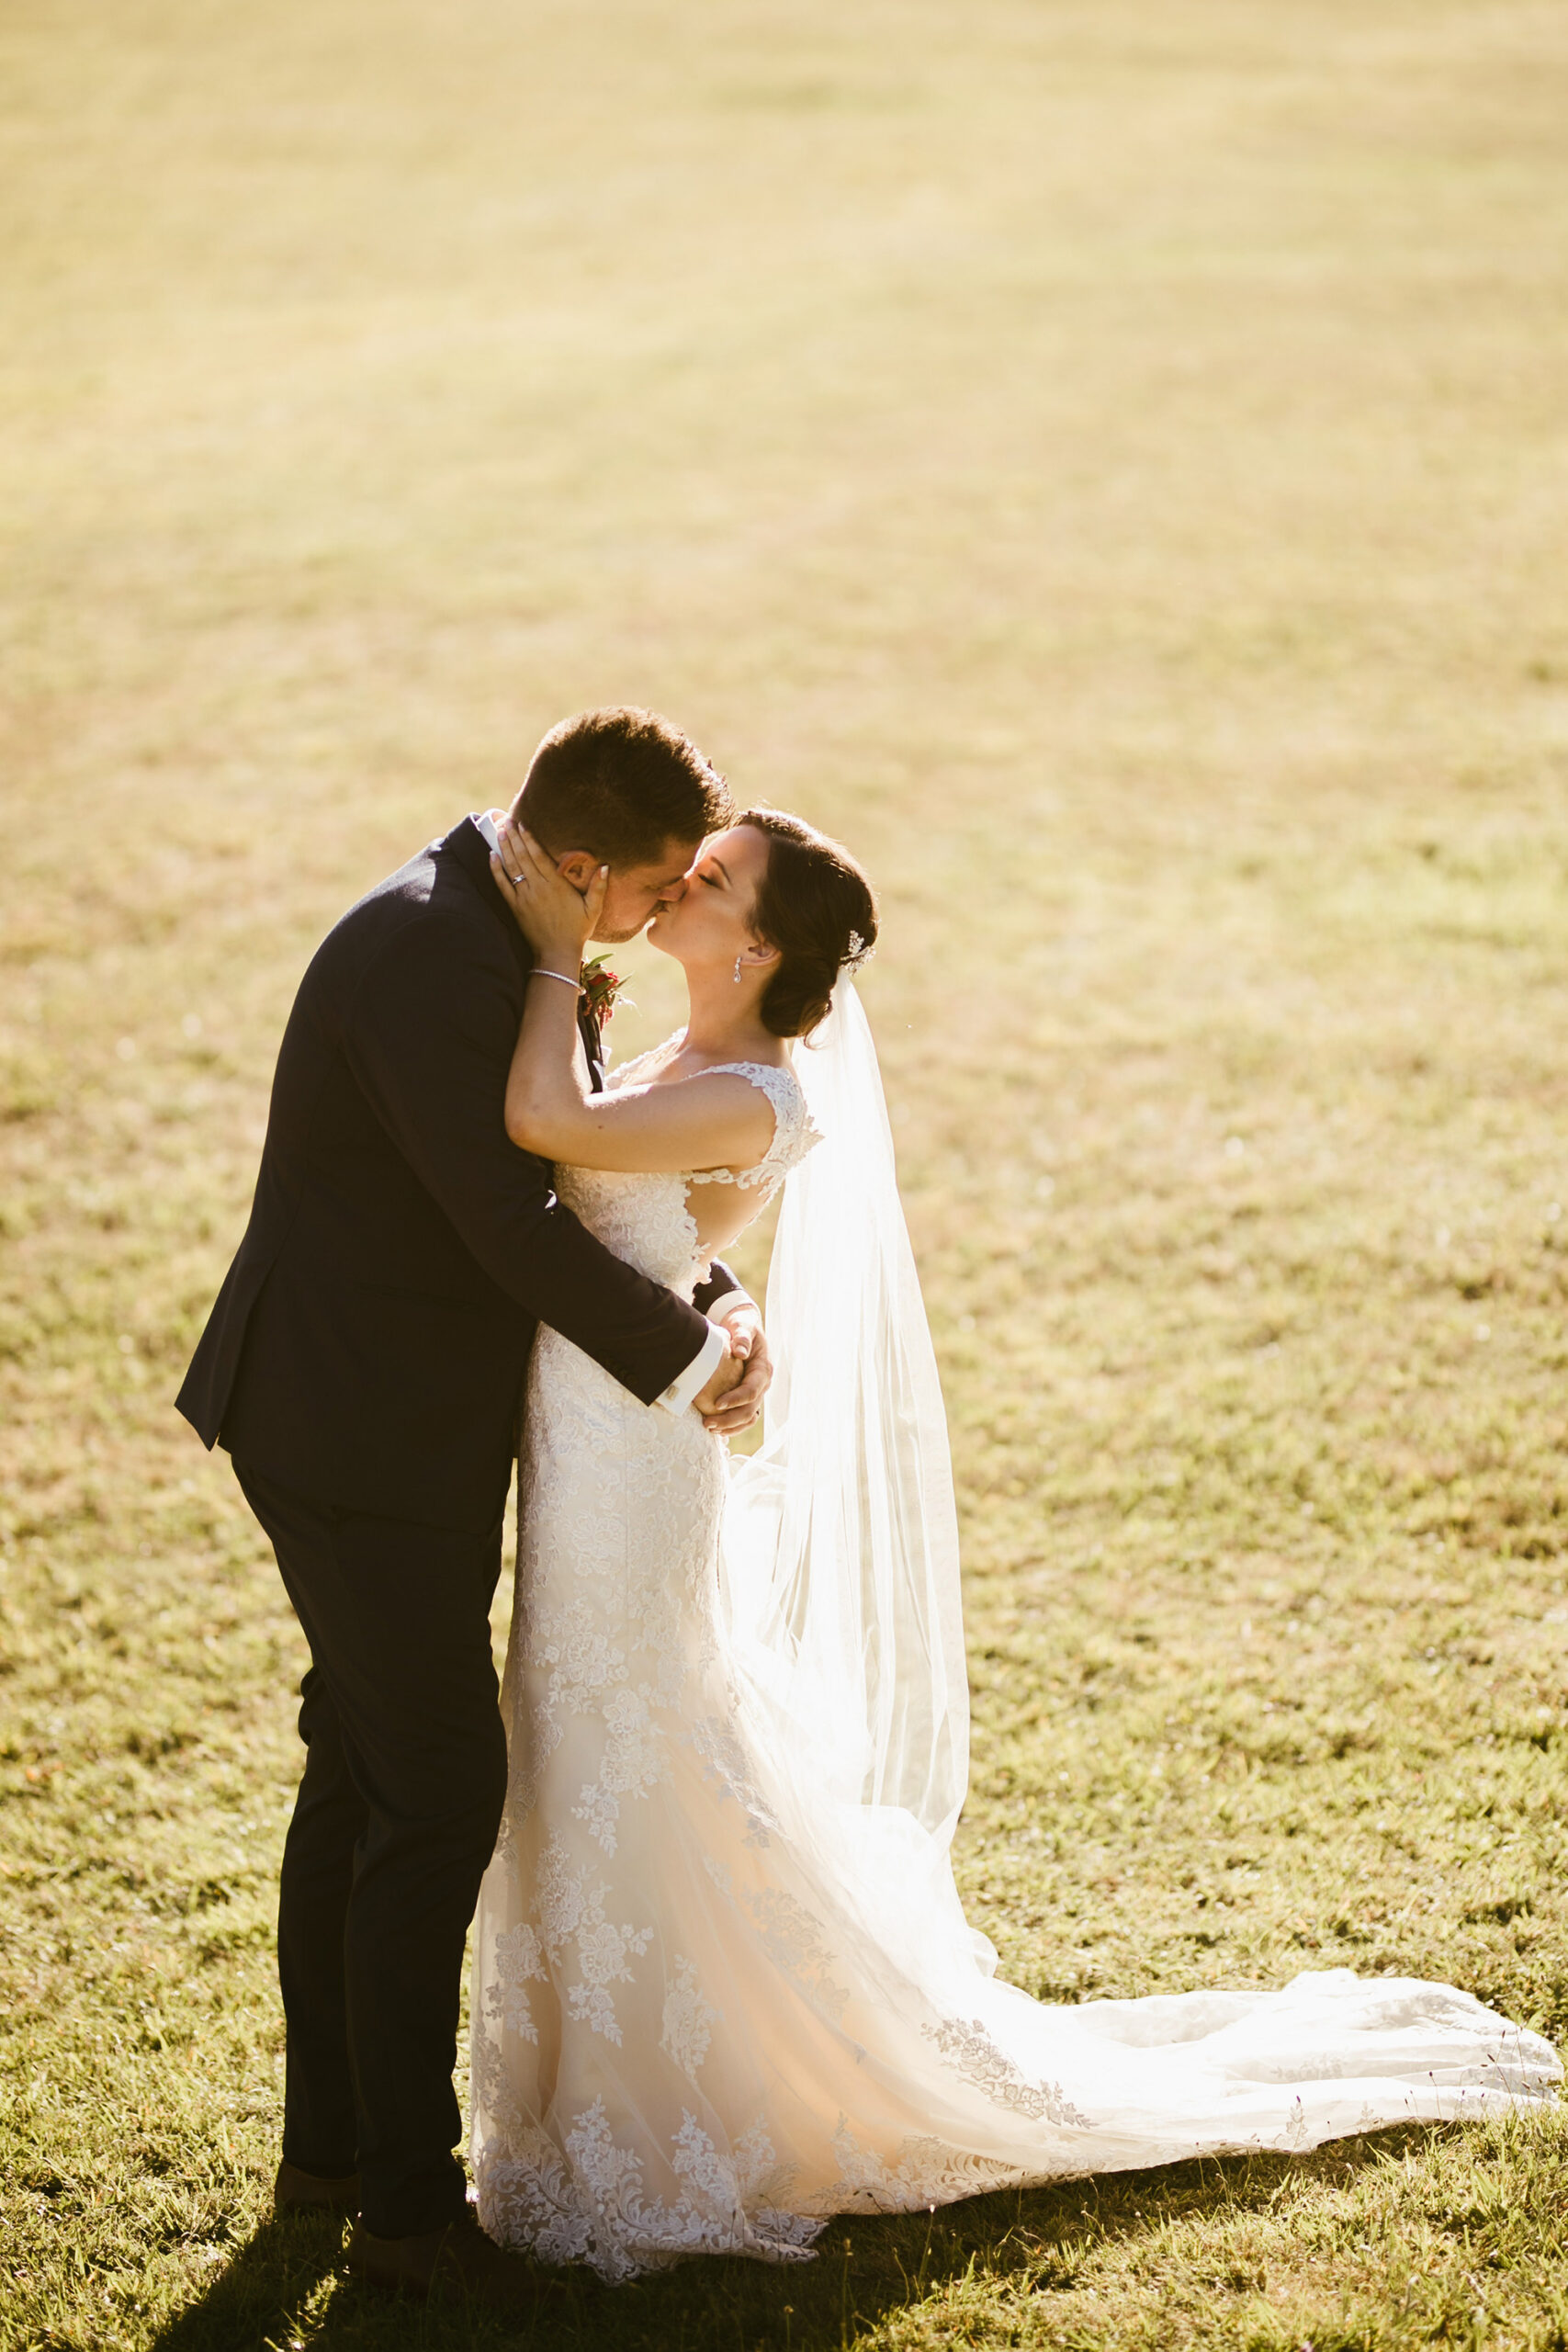 Stephanie_Mitch_Elegant-Country-Wedding_Will-Chao-Photography_SBS_032